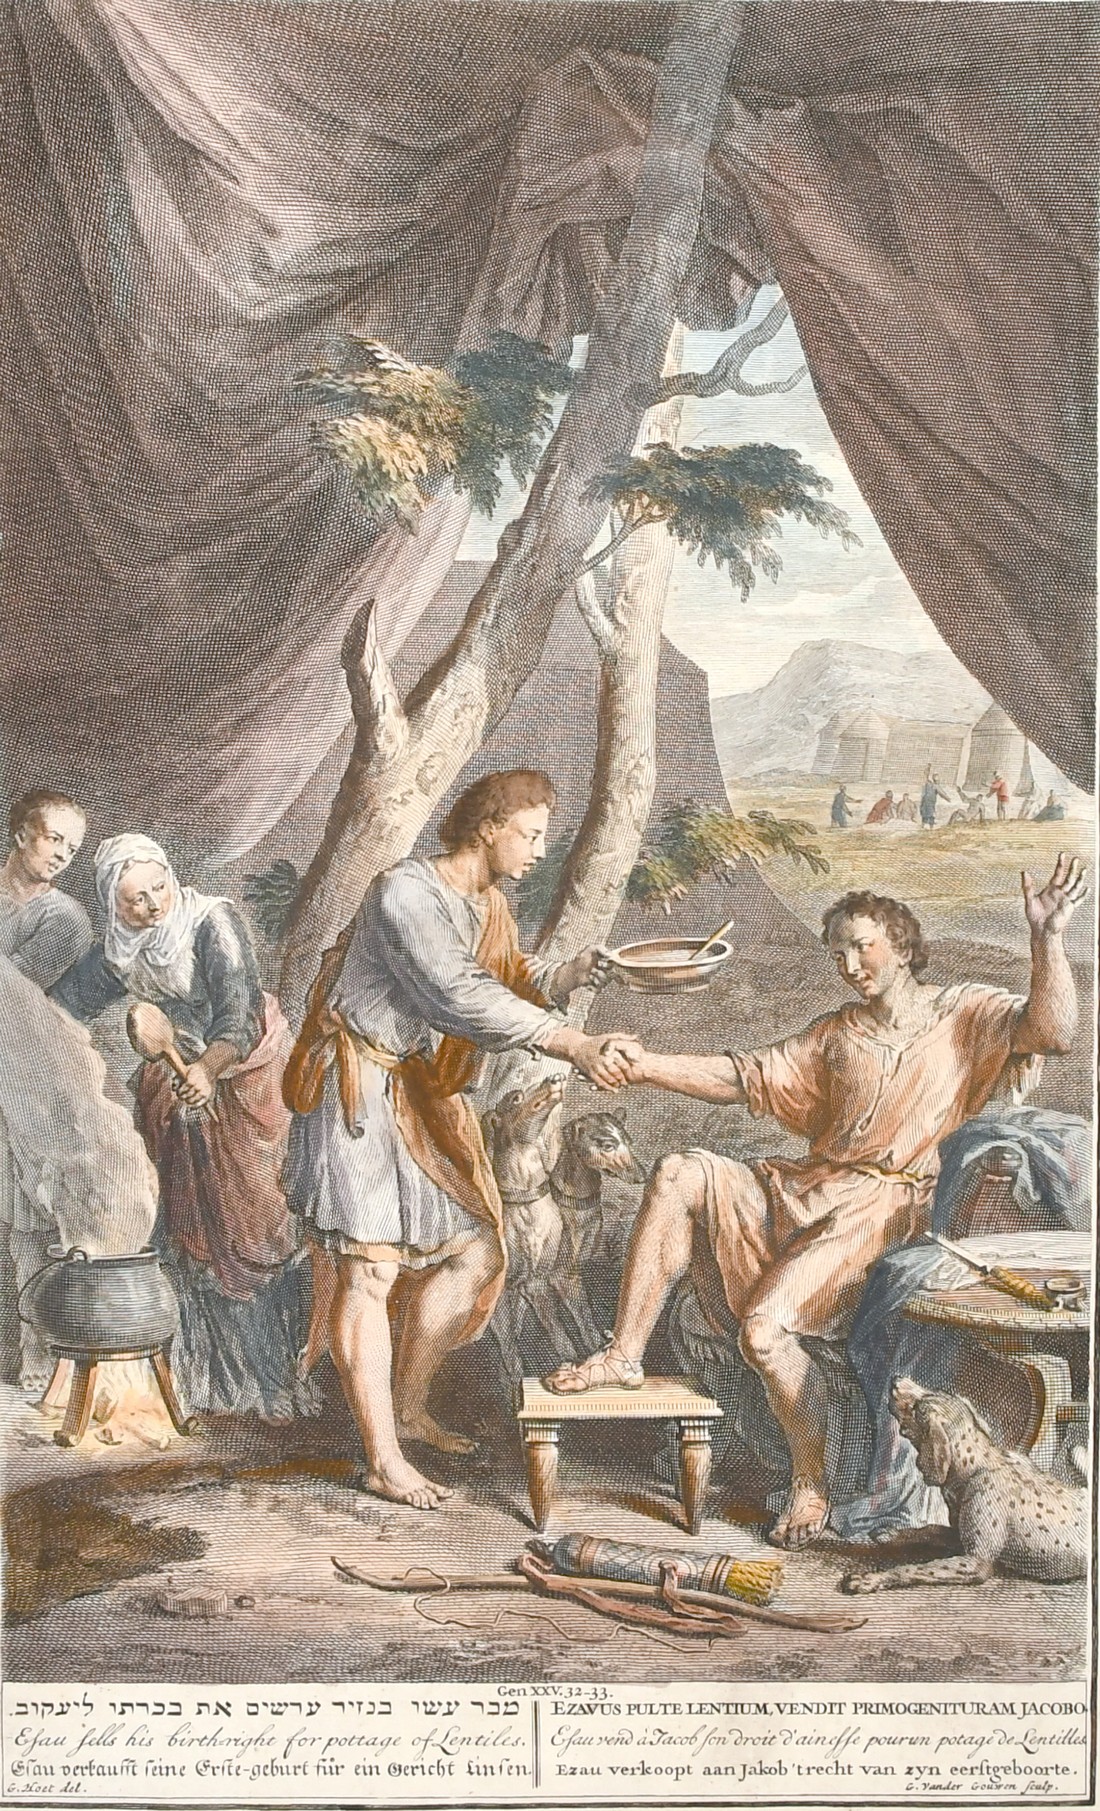 G. Yander Gouwen after G. Hoet, A scene from the book of Genesis, 14" x 8.5".